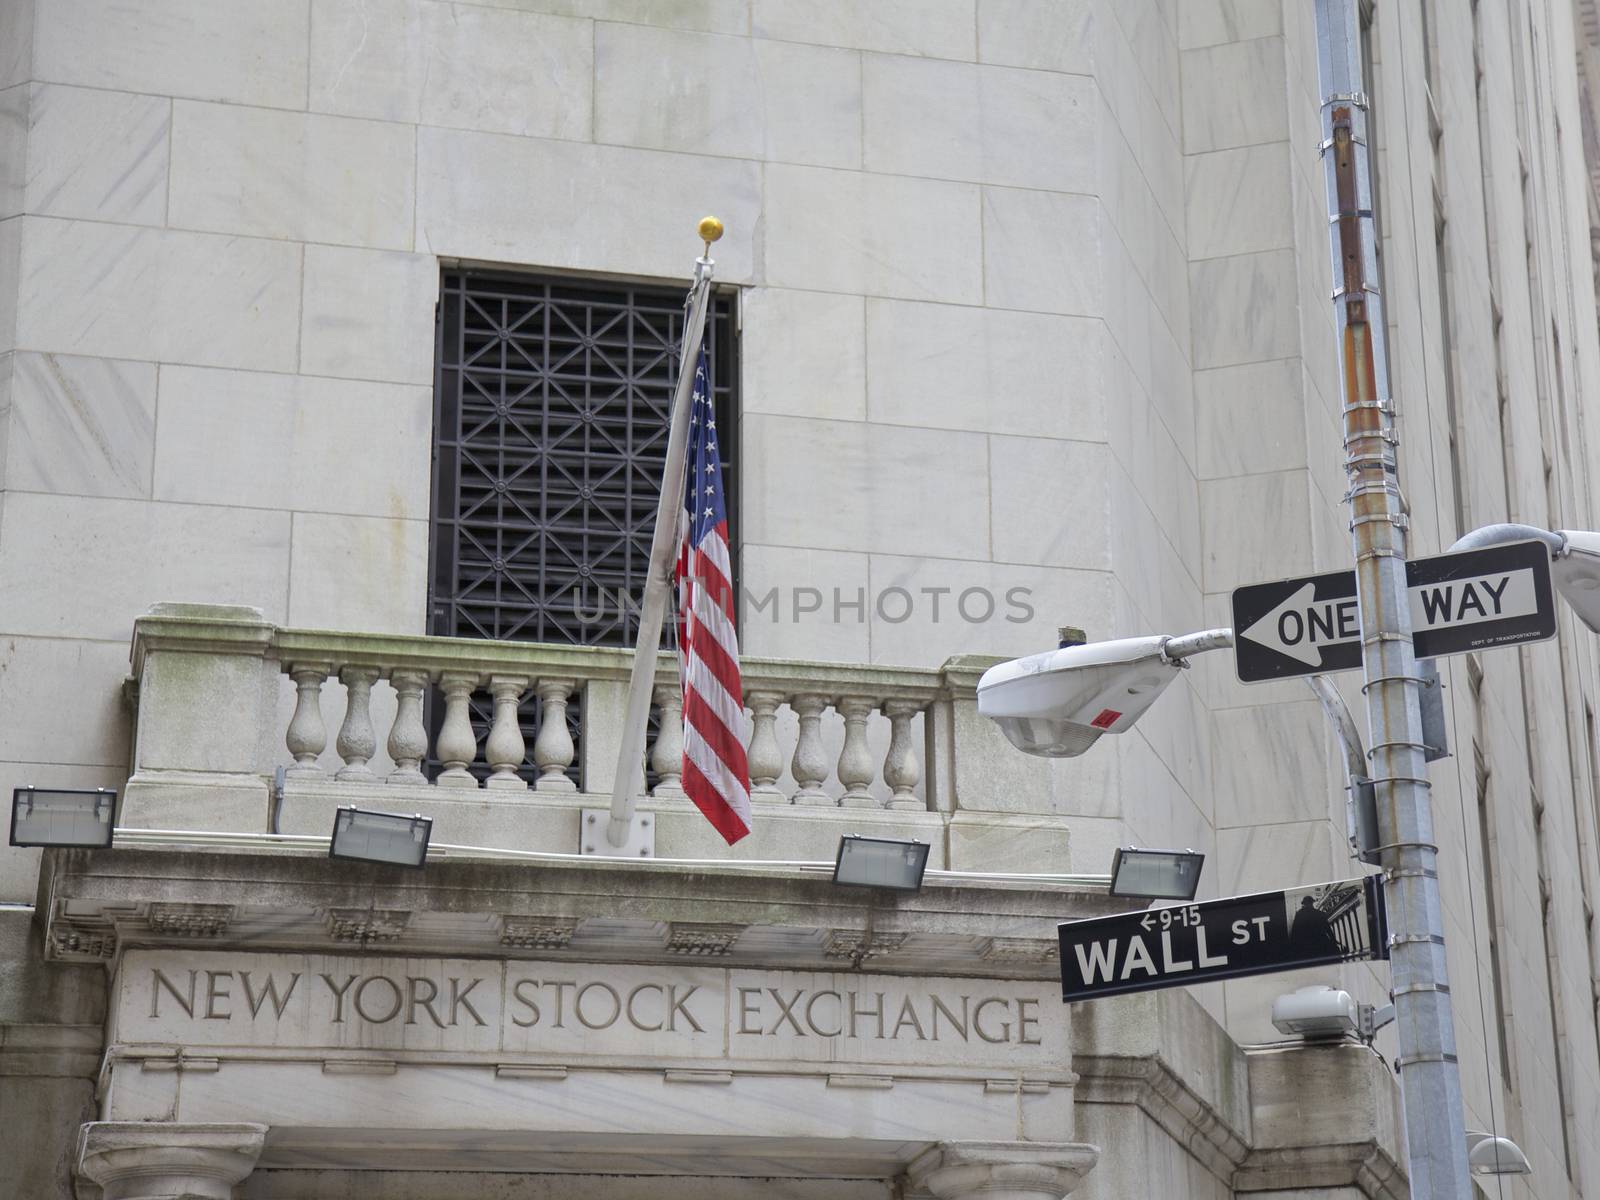 New York Stock Exchange building in Wall Street, New York City, United States

MANHATTAN, NYC - SEPTEMBER 29: Building the New York Stock Exchange building in Wall Street, New York City, USA. 